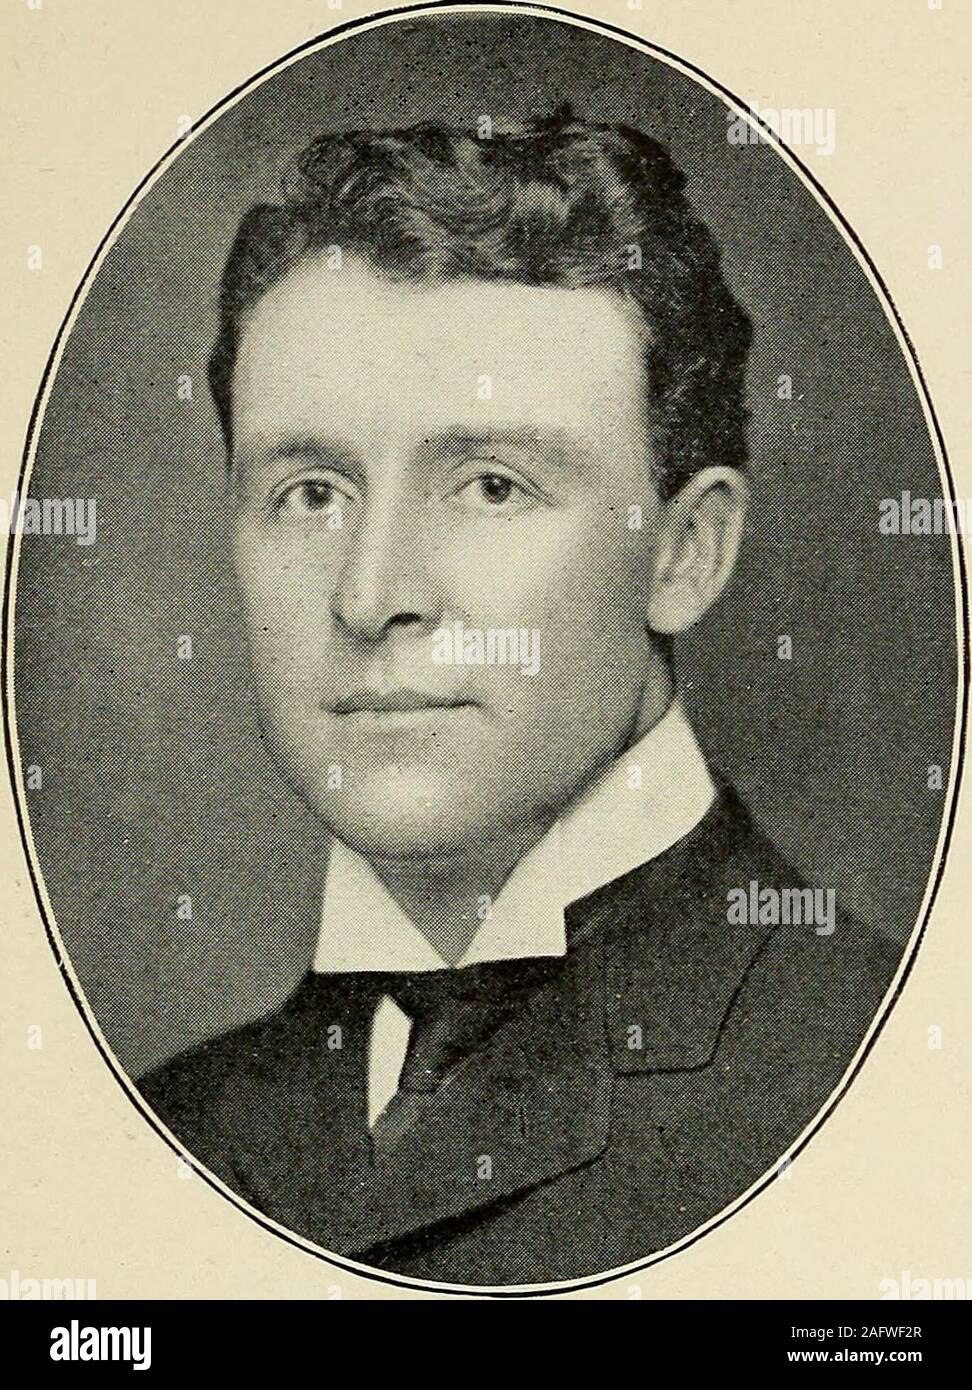 . Men of Minnesota; a collection of the portraits of men prominent in business and professional life in Minnesota. CHARLES S. HULBERT MINNEAPOLIS.CITY TREAS. VICE PRES. SWED. AM. NATl BANK. JOSHUA ROGERS MINNEAPOLIS.CITY COMPTROLLER (190O—). 50 MEN OF MINNESOTA.. Stock Photo